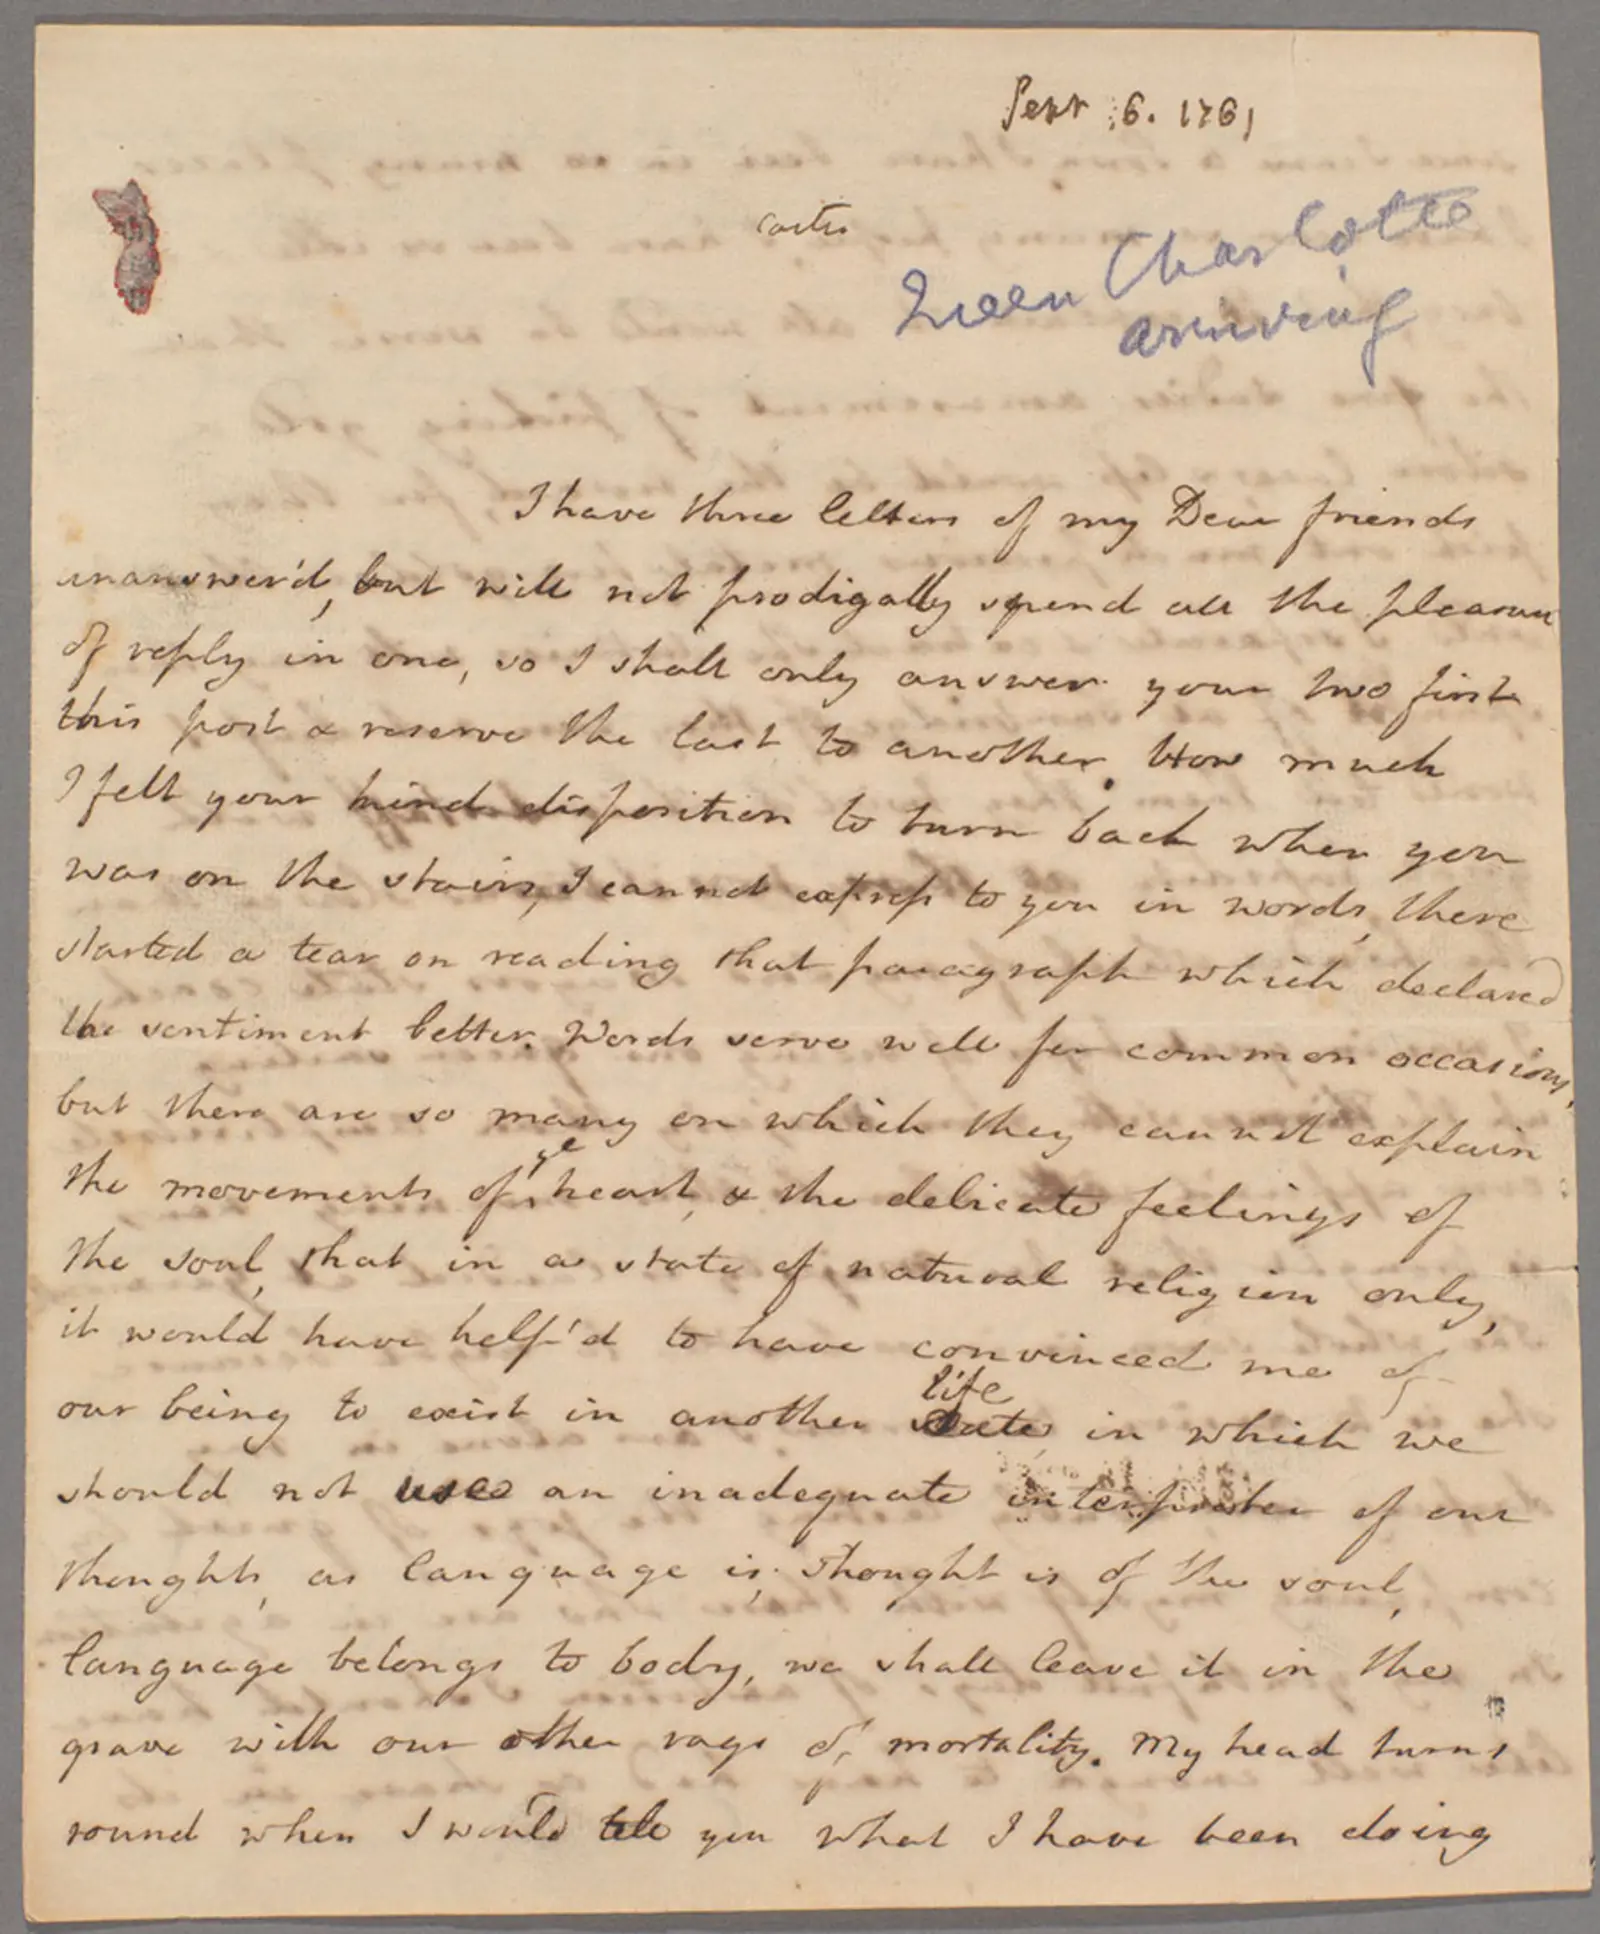 Handwritten letter from the 18th century.